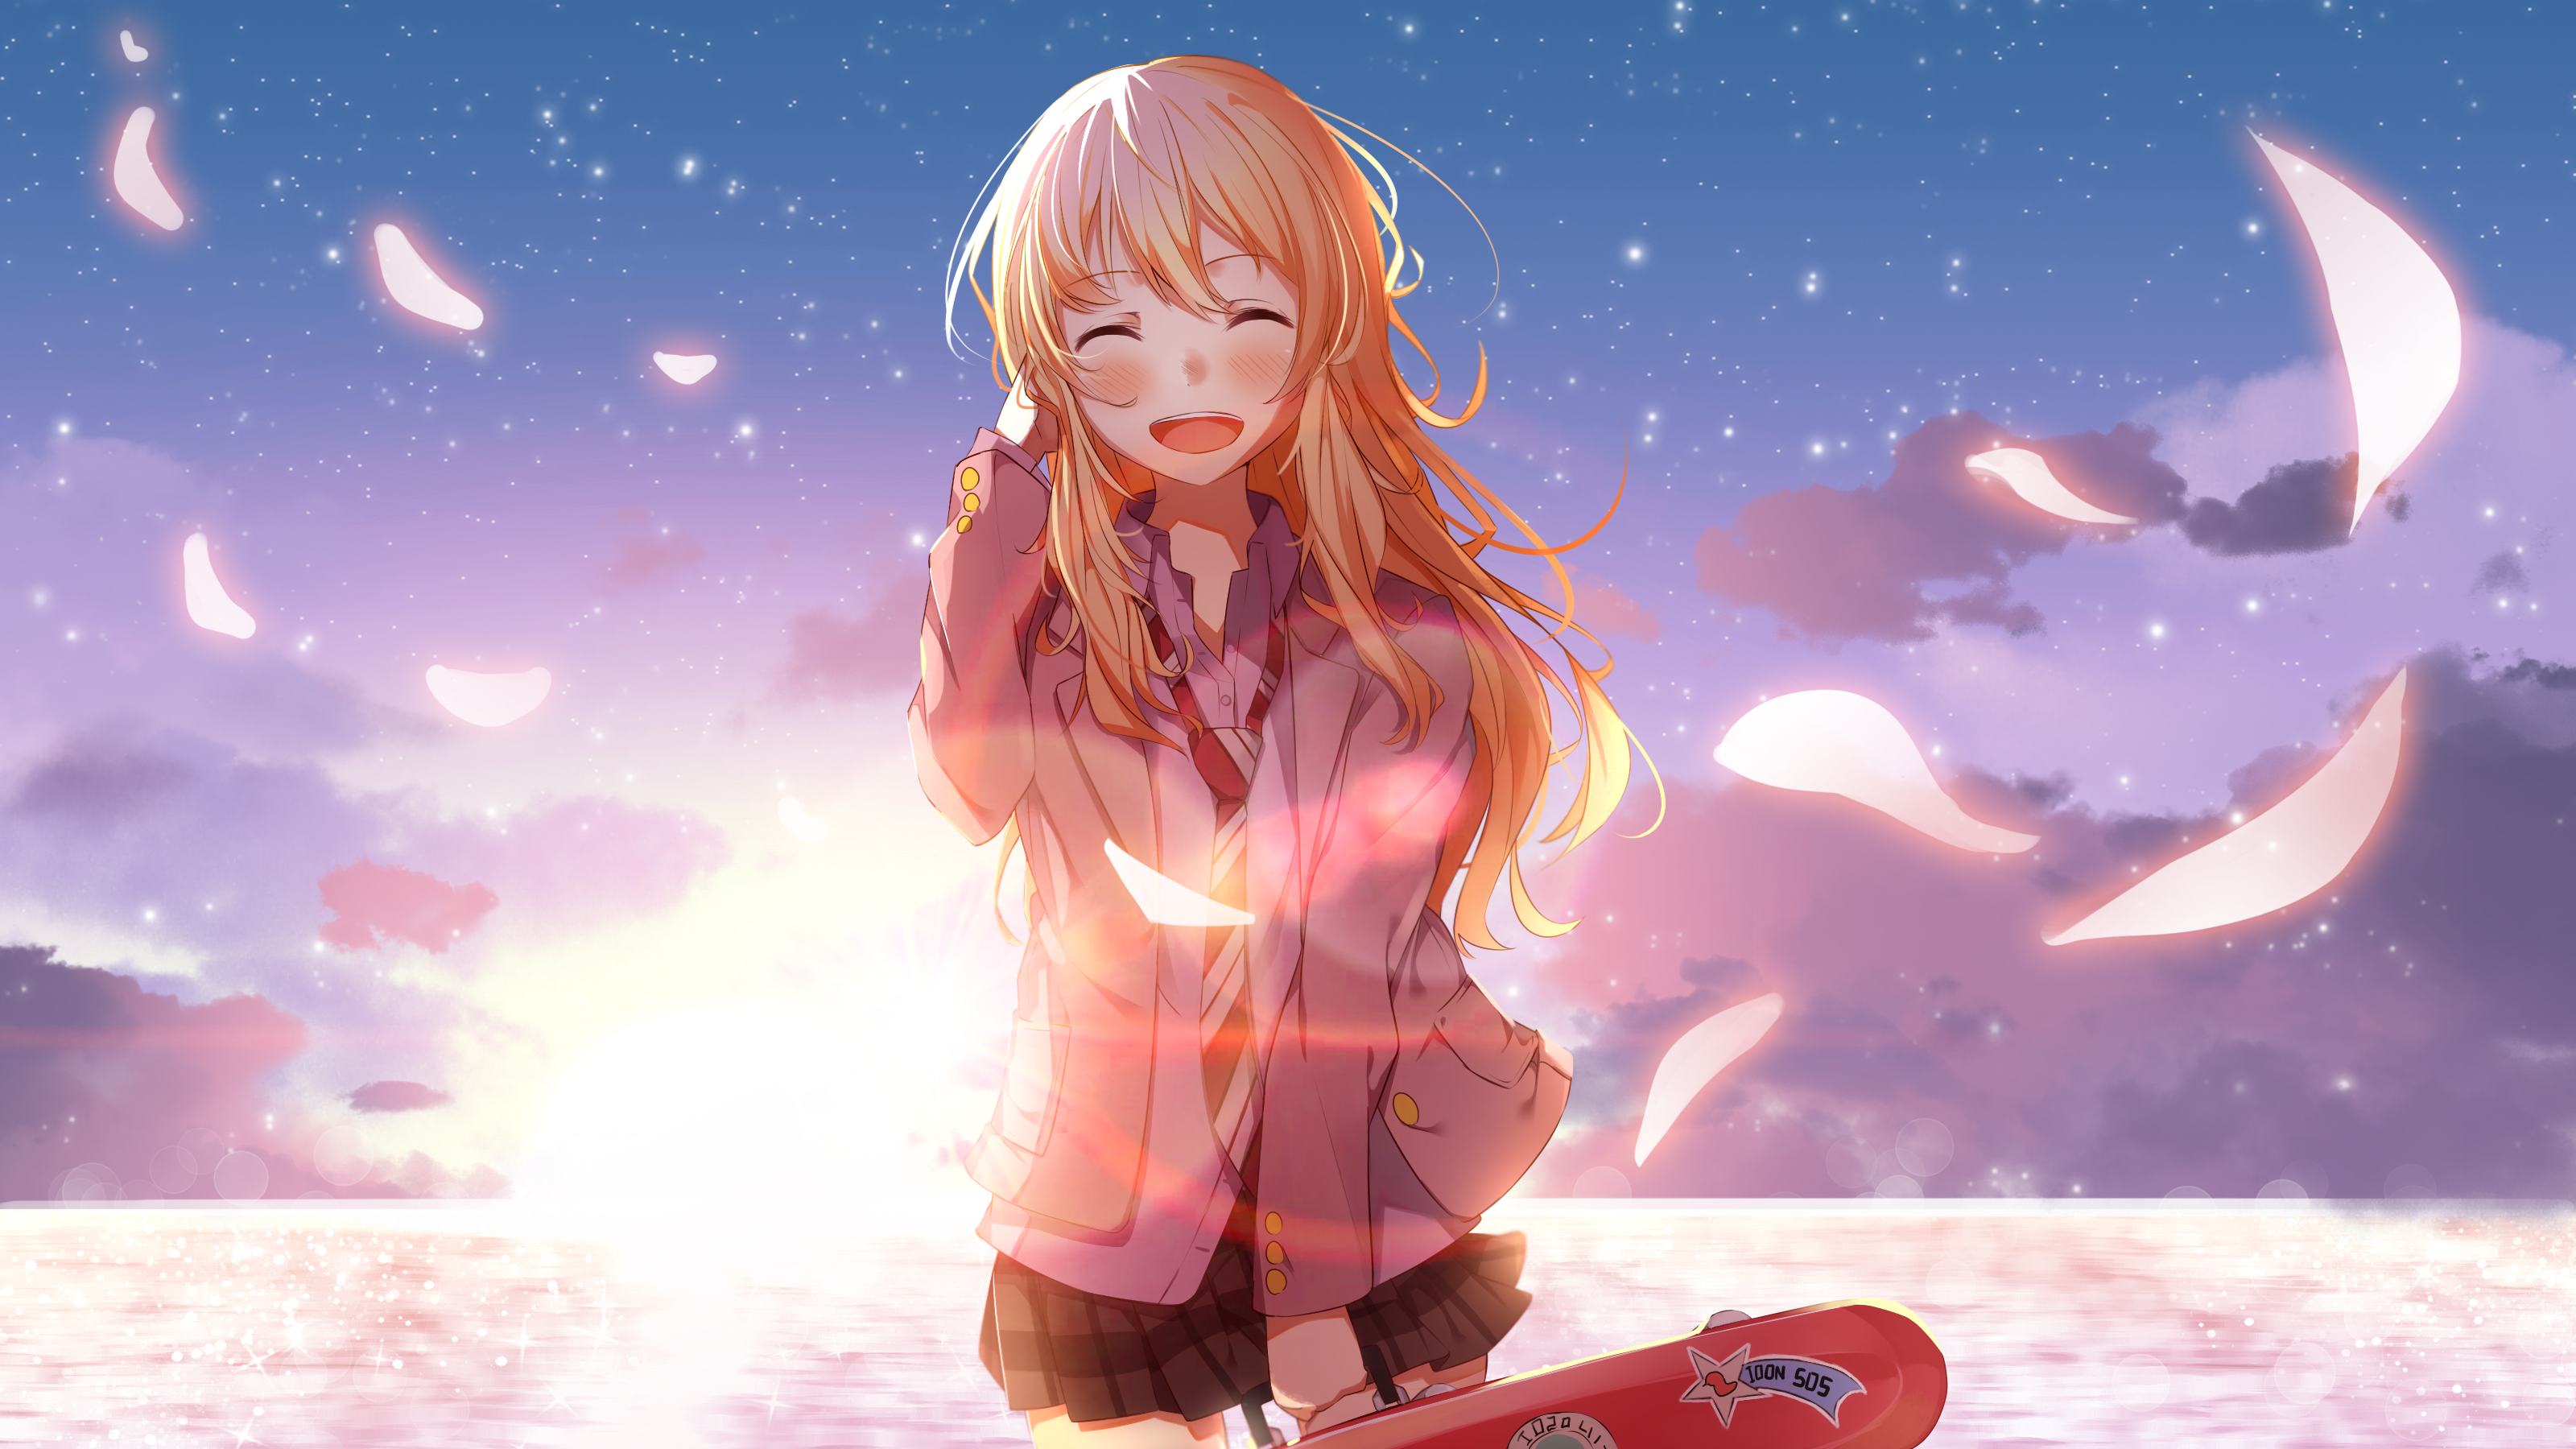 Your Lie in April HD Wallpapers and Backgrounds. 